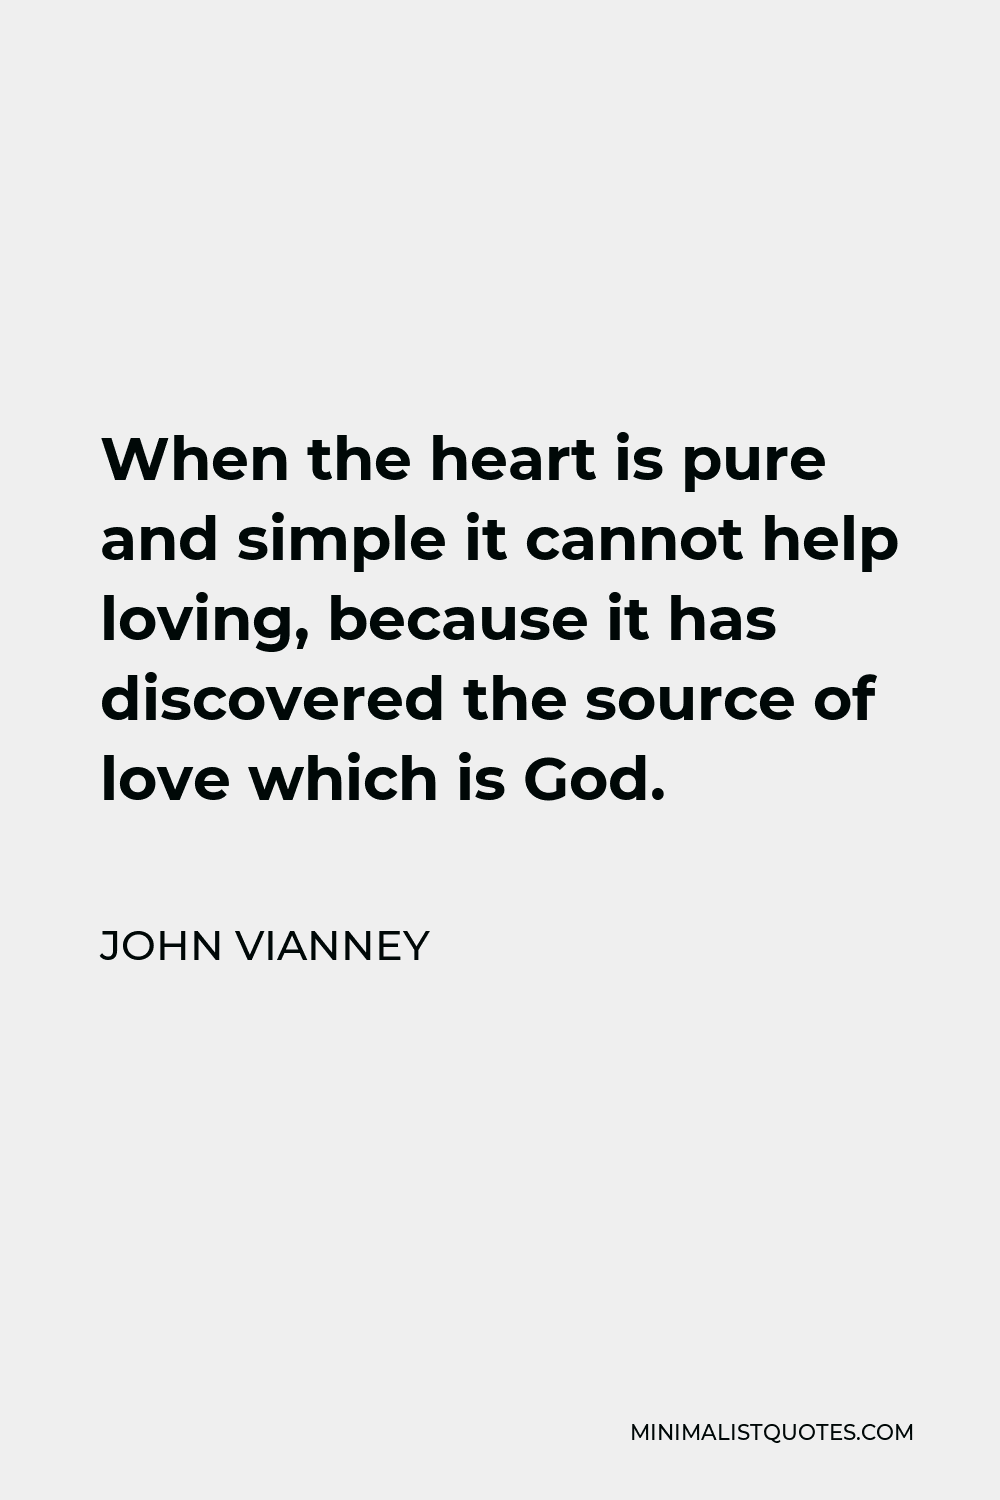 John Vianney Quote - When the heart is pure and simple it cannot help loving, because it has discovered the source of love which is God.